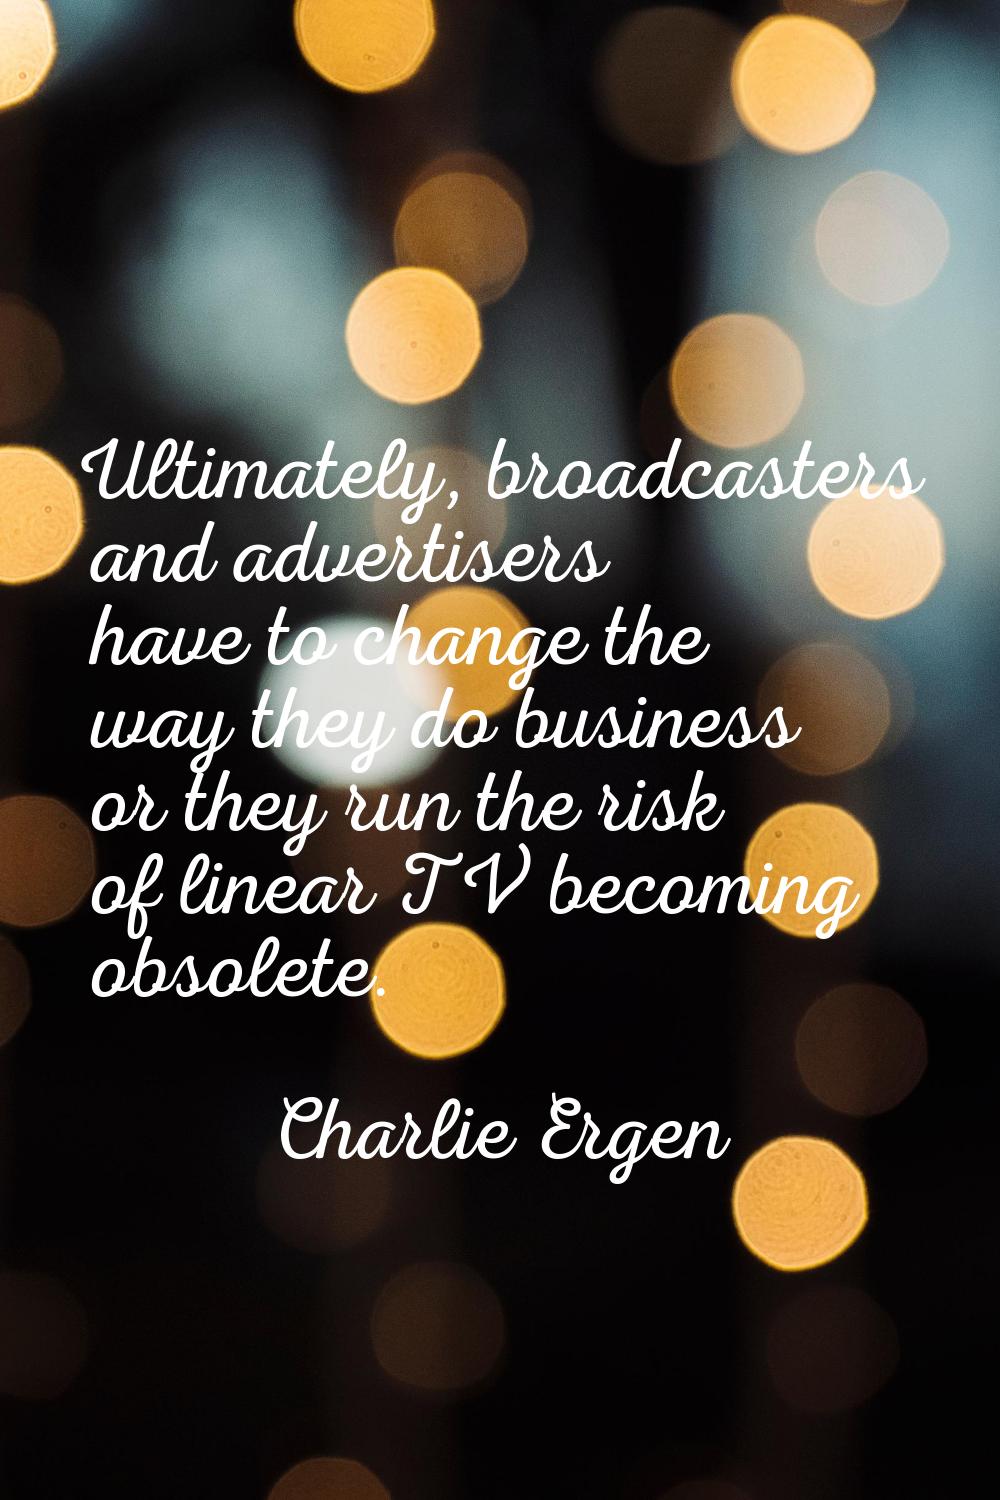 Ultimately, broadcasters and advertisers have to change the way they do business or they run the ri